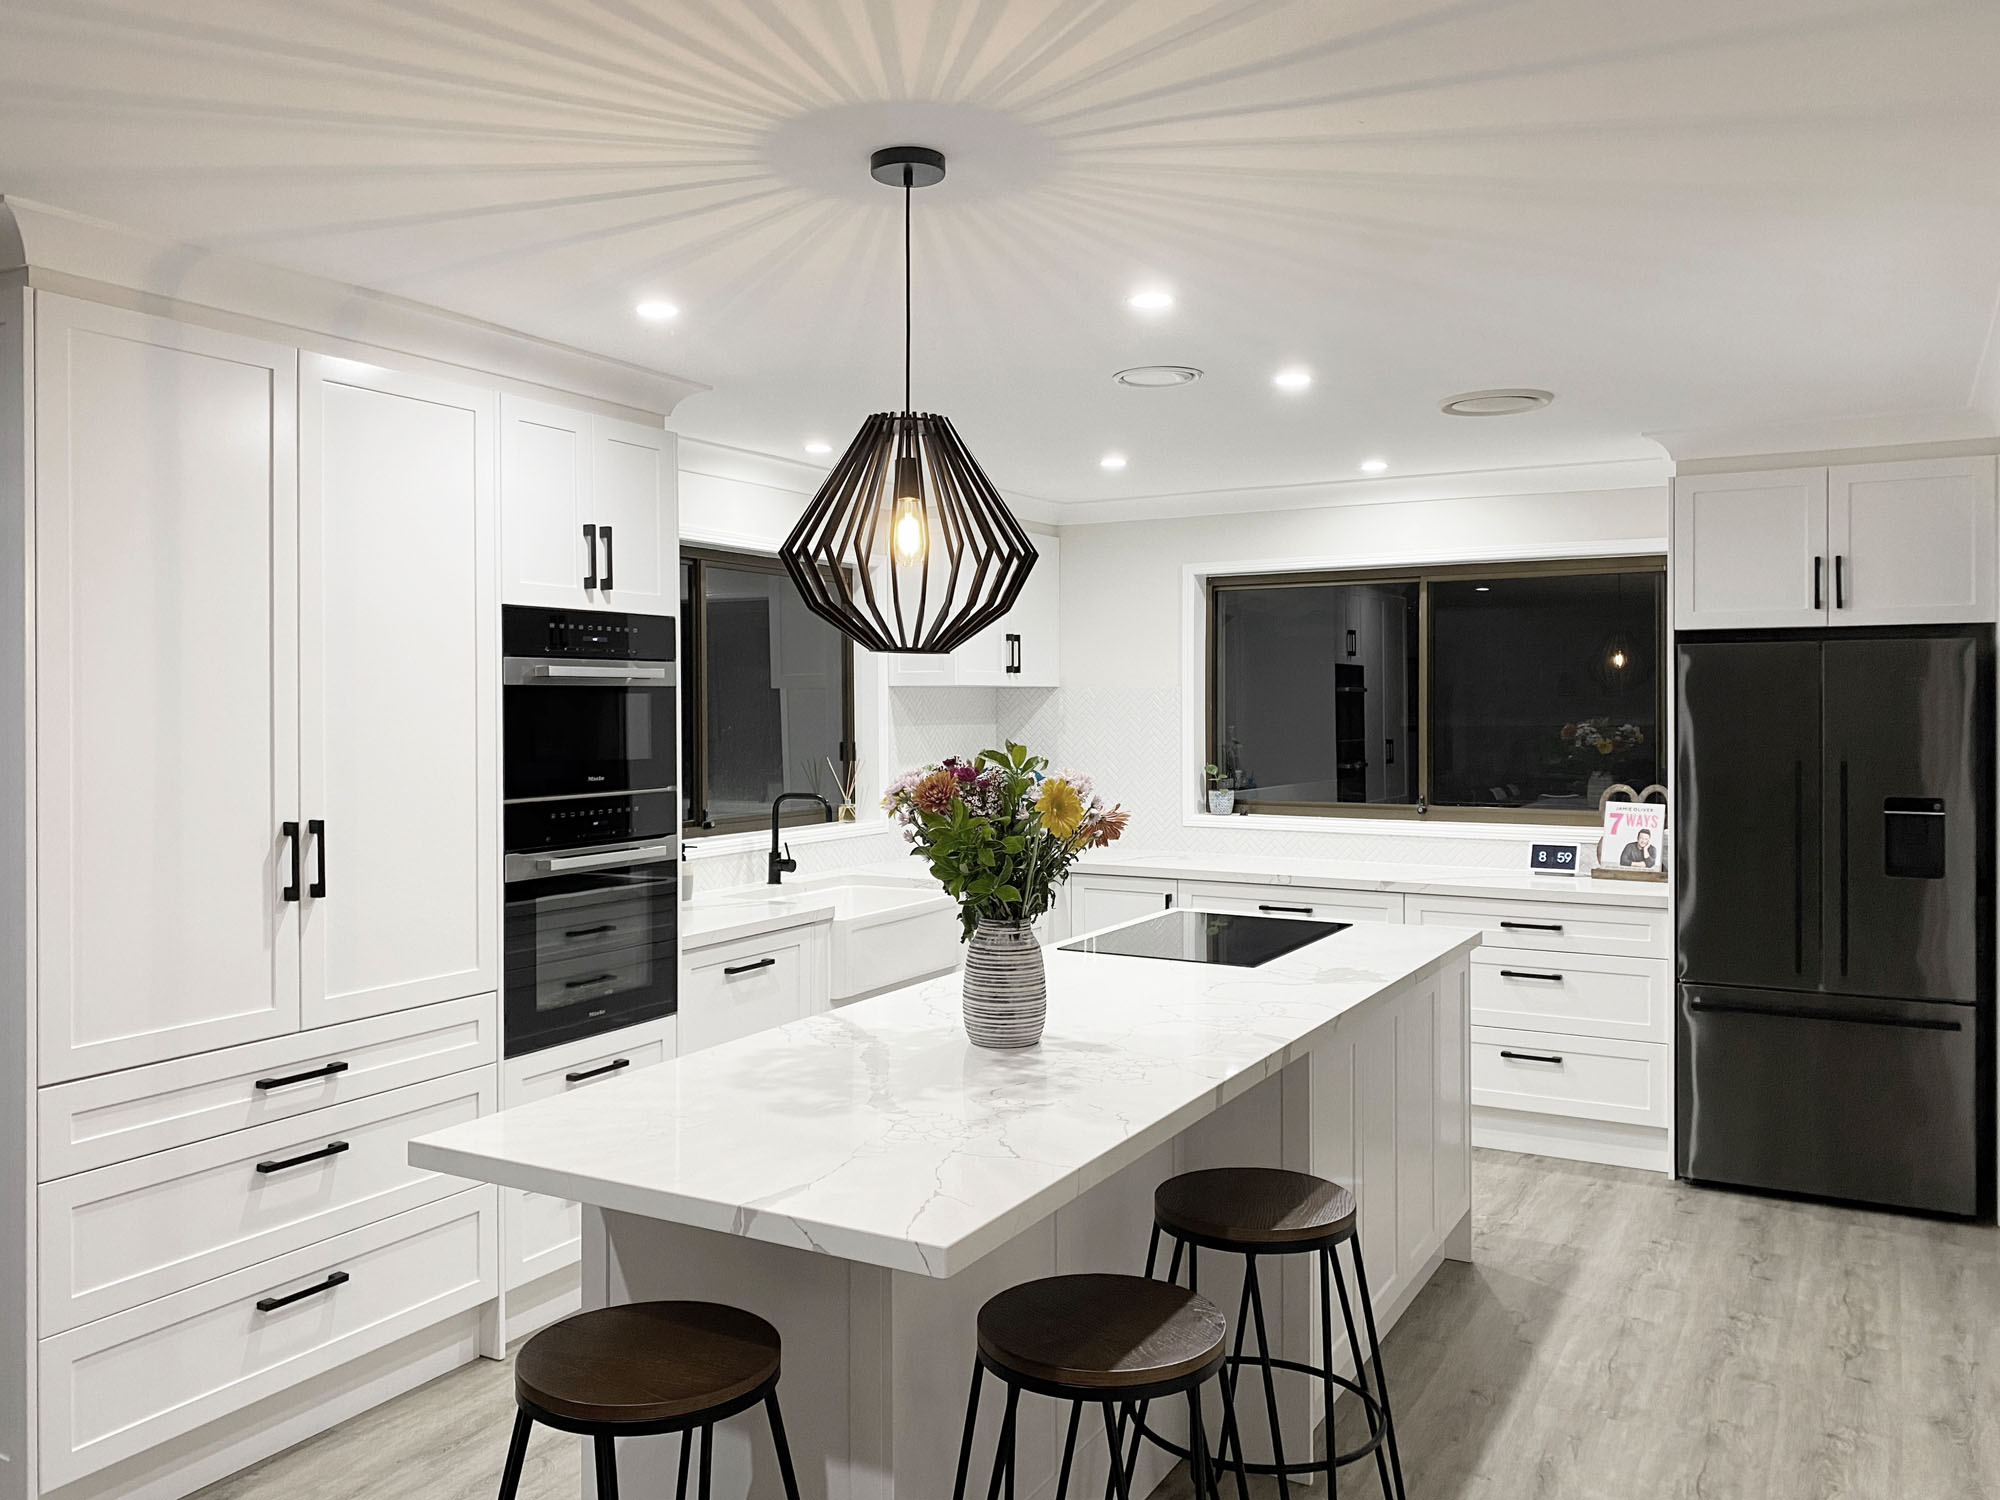 Full White and Black Kitchen with Pendant Lighting